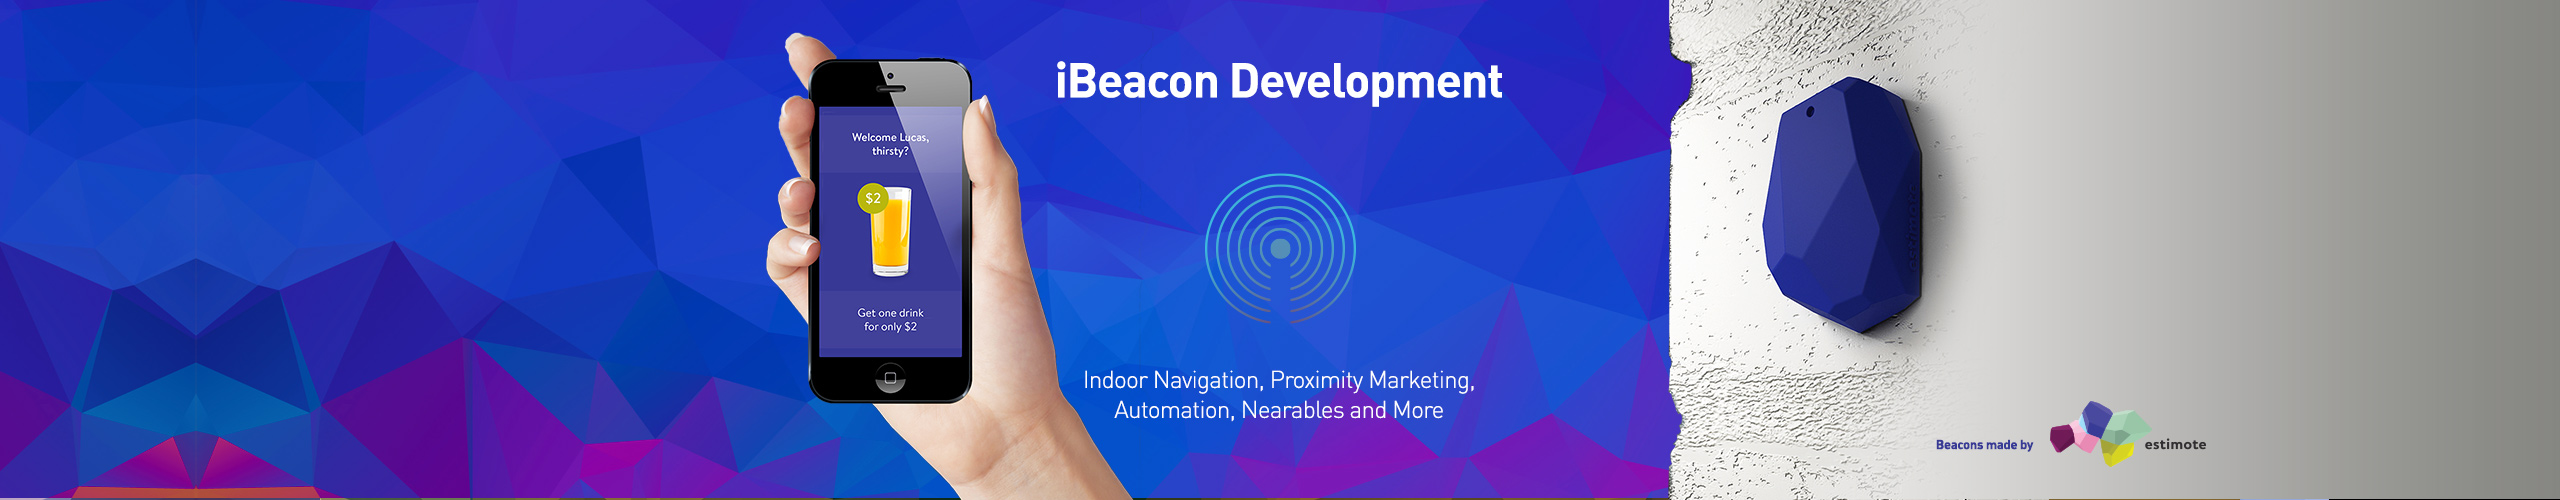 iBeacons development - Indoor Navigation, Proximity Marketing, Automation, Nearables and More